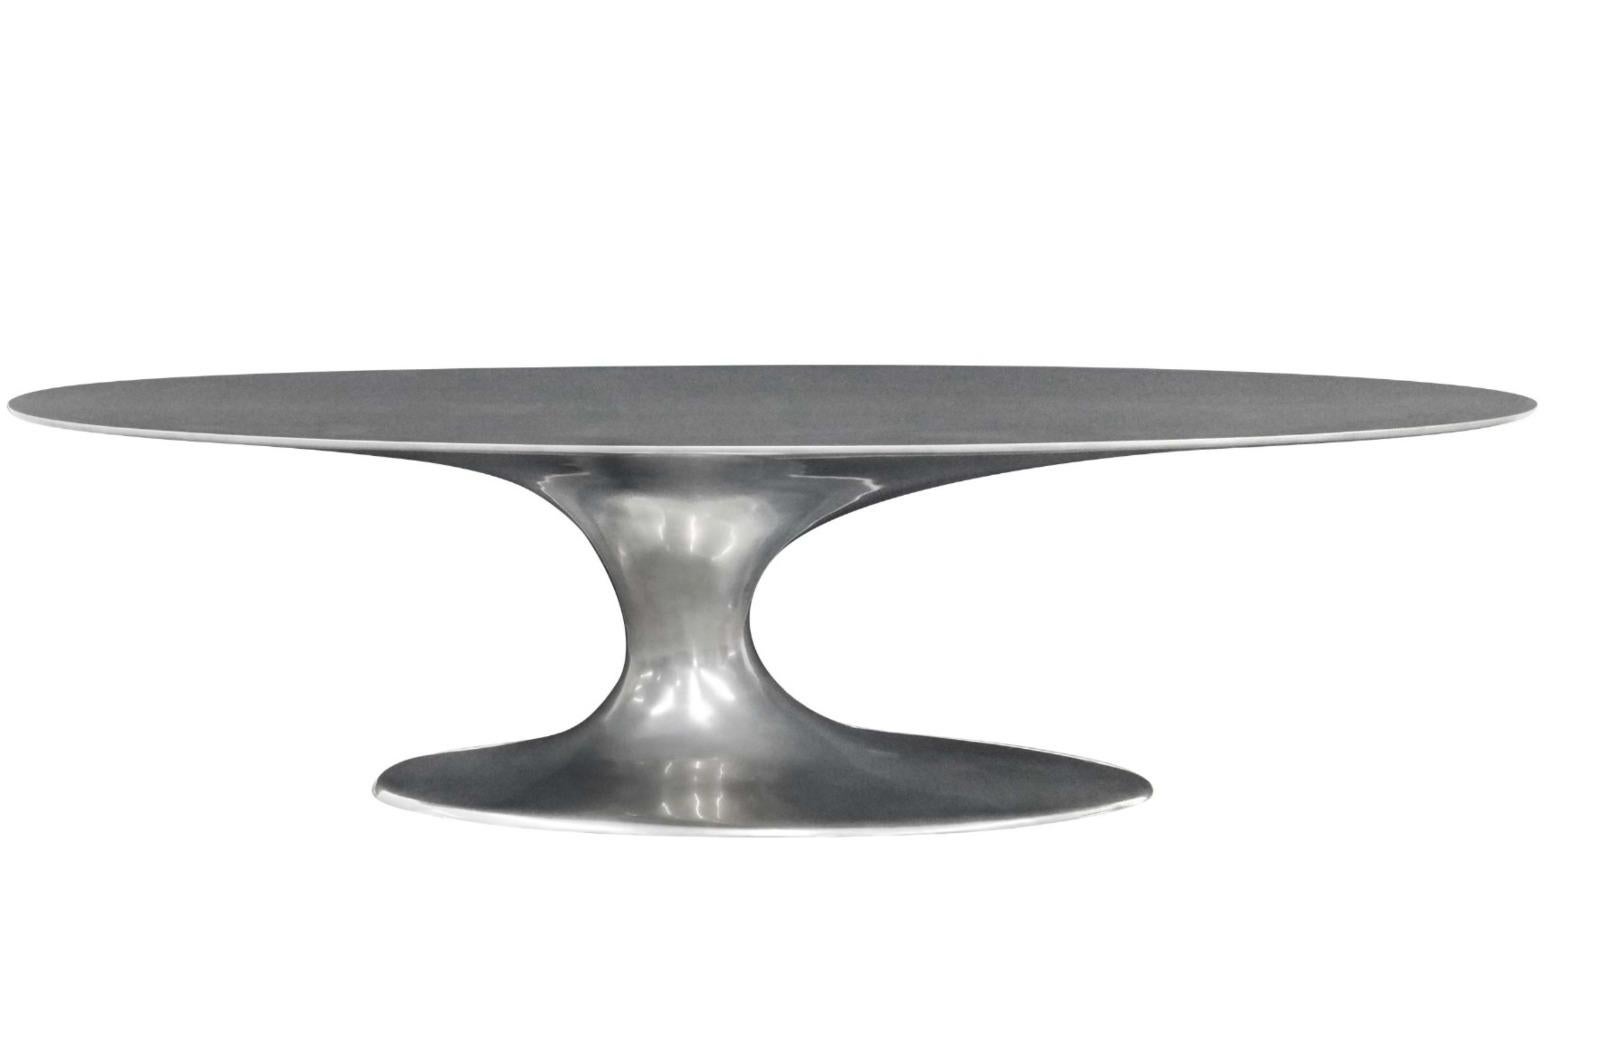 Dining table.

General information

Dimensions (cm): 280 x 105 x 75
Dimensions (in): 110.2 x 41.3 x 29.5
Weight (kg): 87
Weight (lbs): 191.8
Seats: 6 to 8

Materials and colors
Structure: Resin reinforced with fiberglass finished in chrome color.


